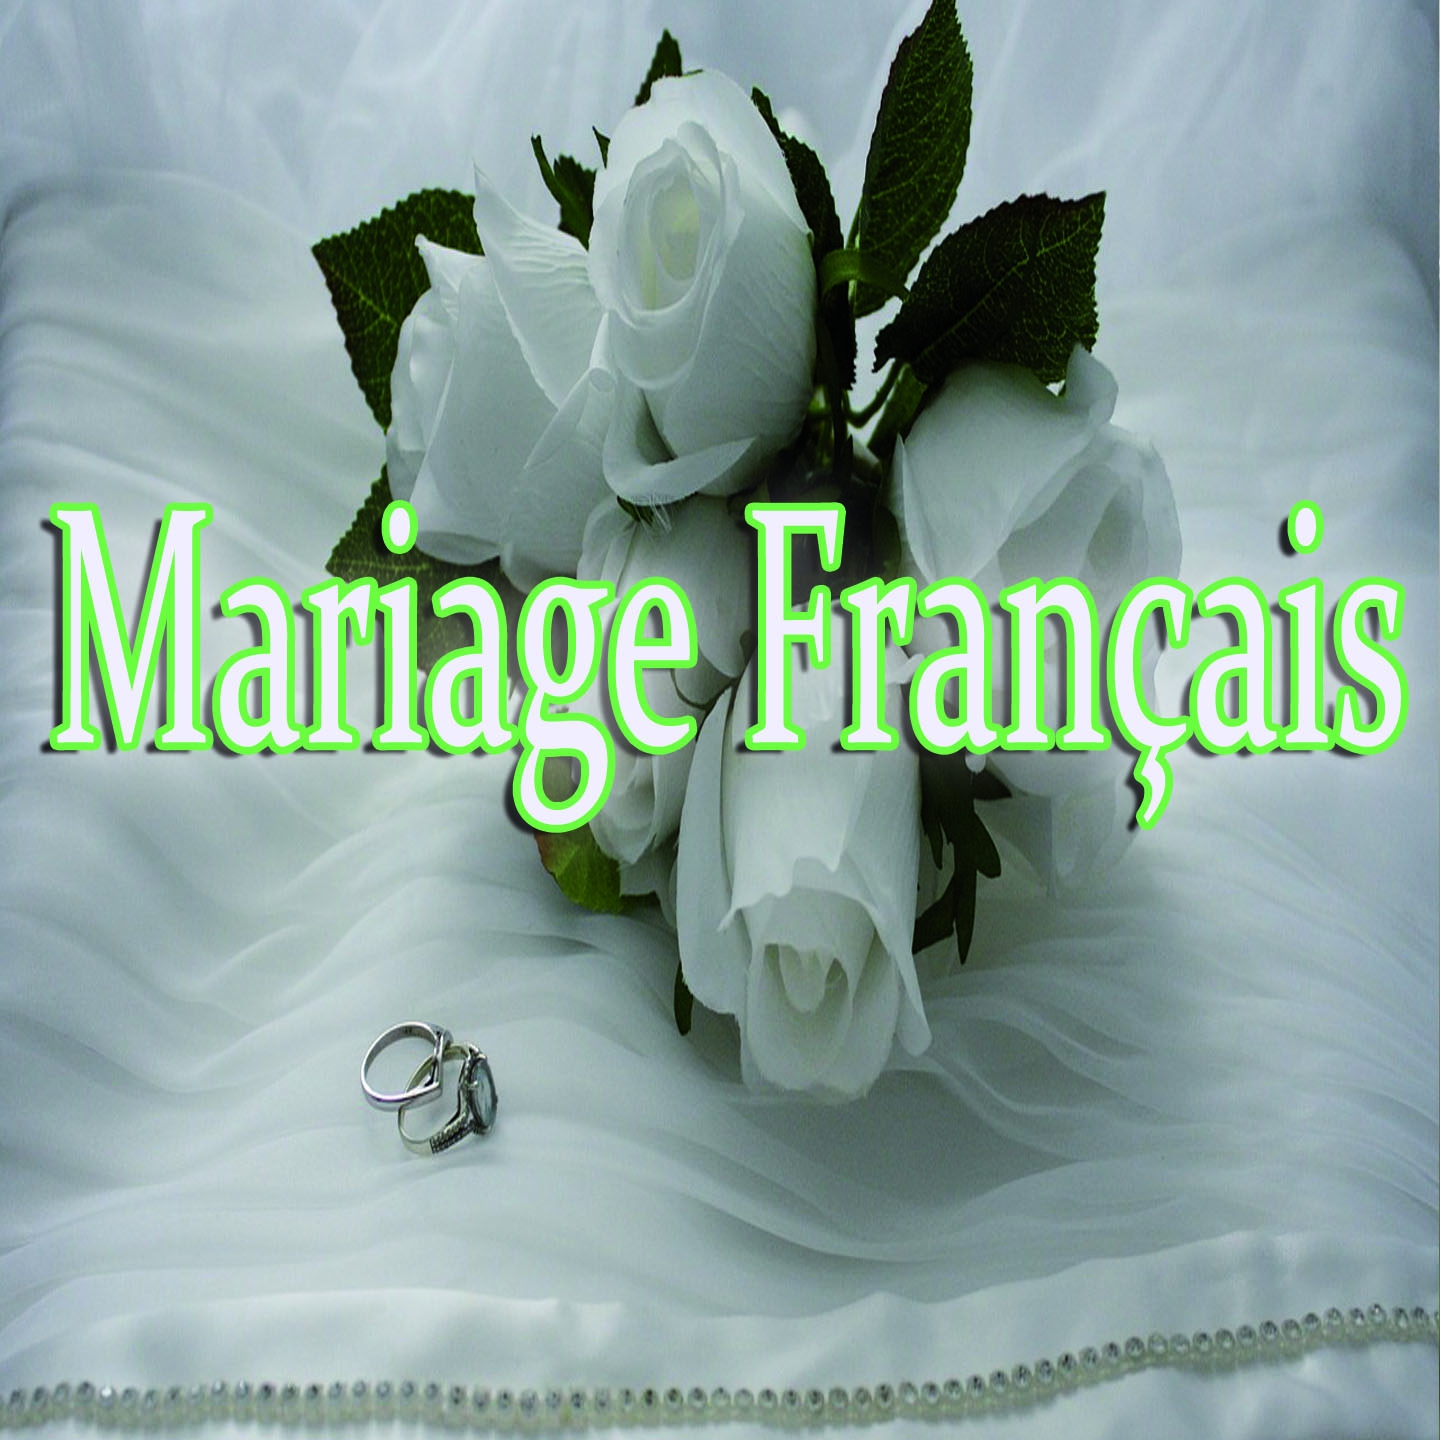 Mariage fran ais The Best French Songs for Wedding